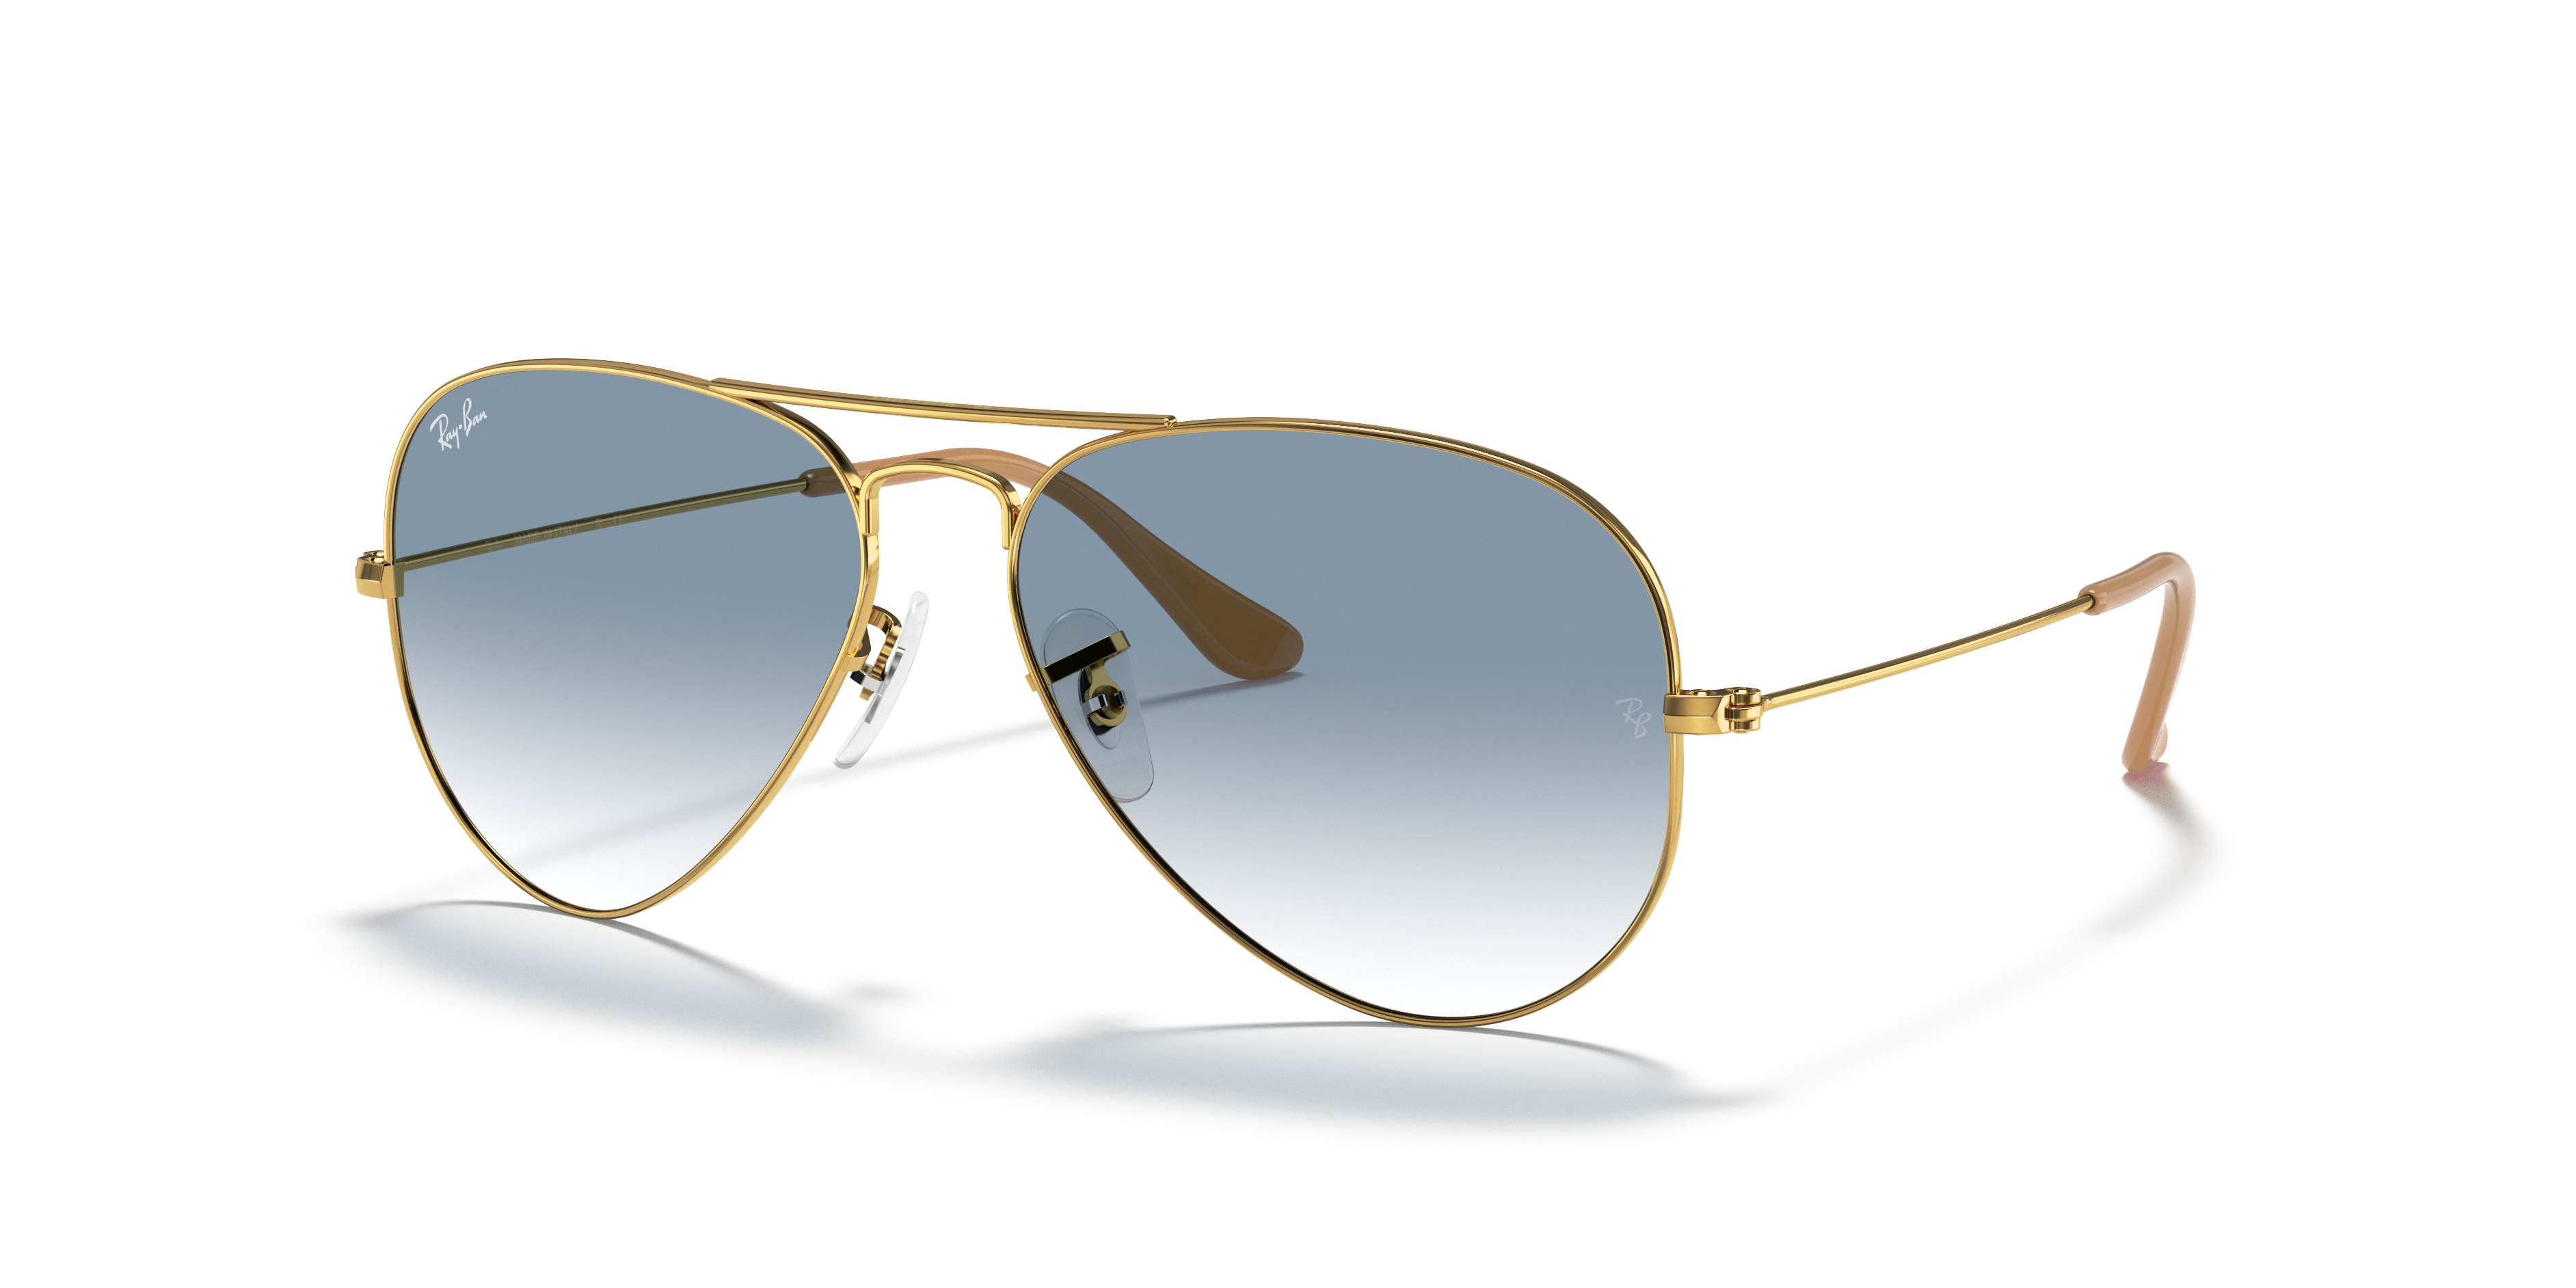 Aviator Gradient Sunglasses in Gold and Light Blue | Ray-Ban®